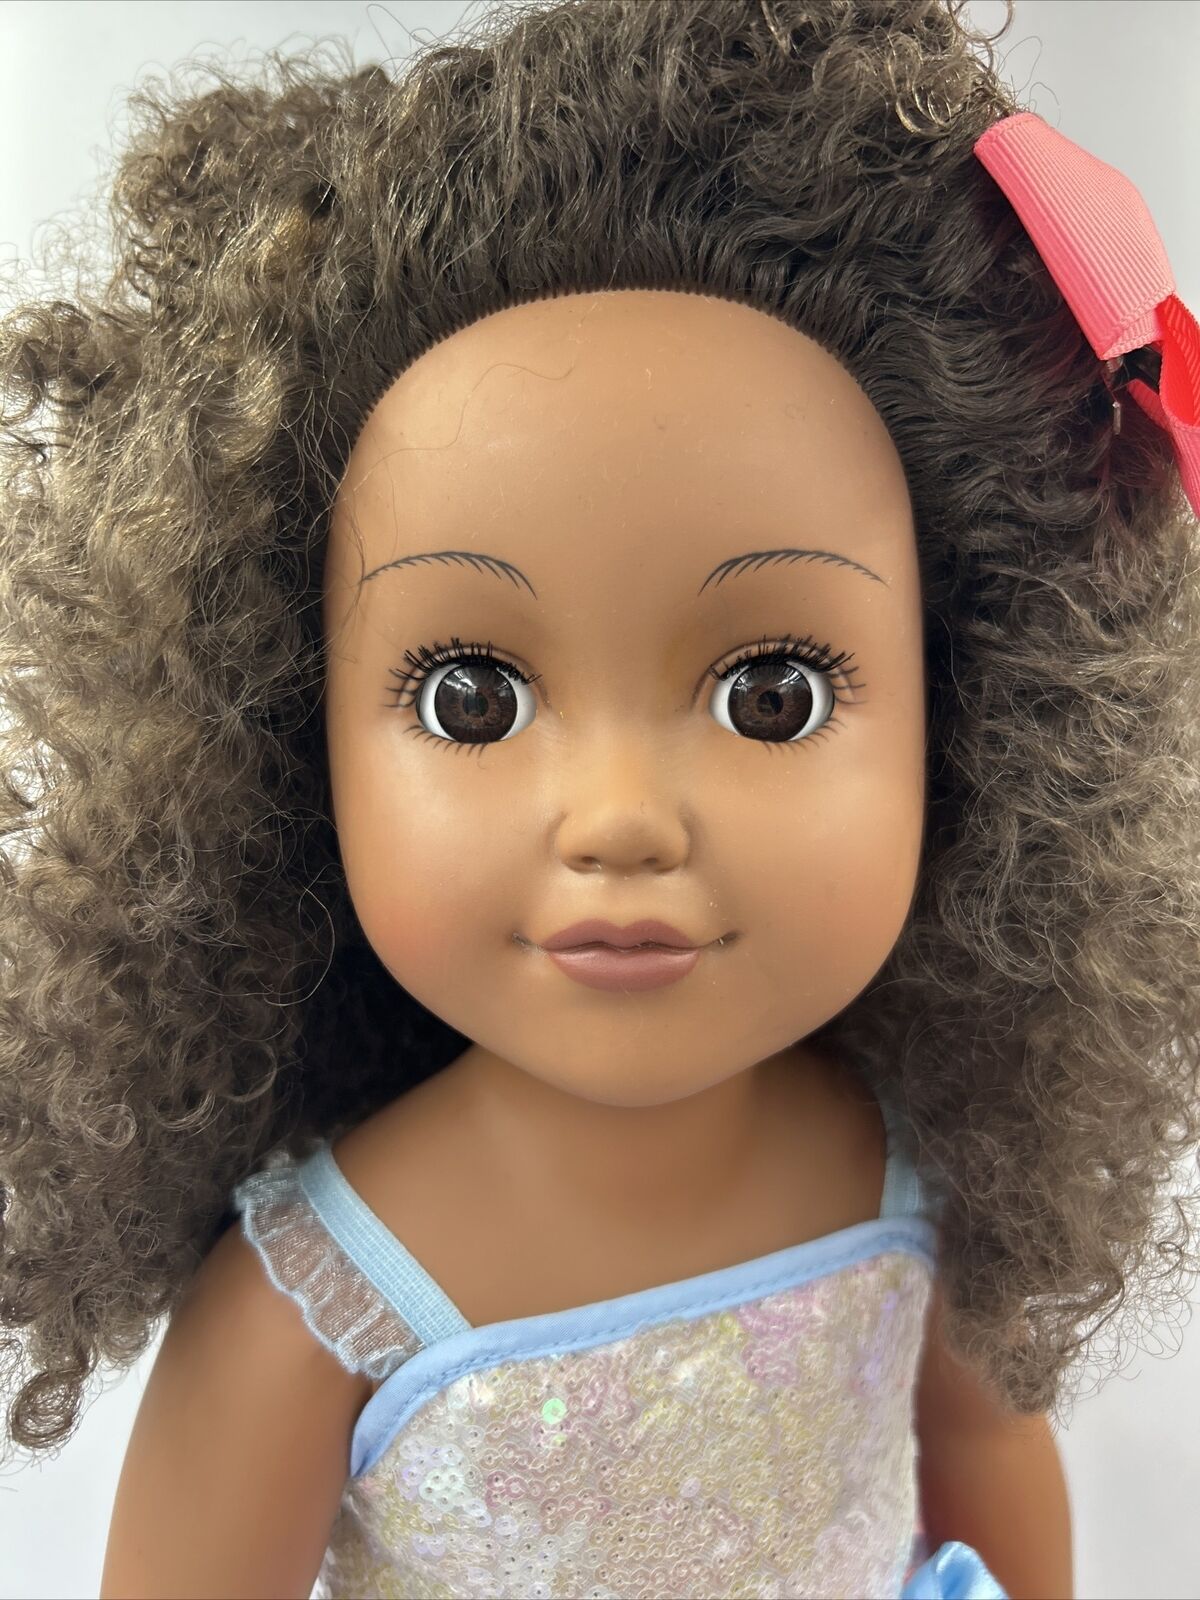 18" Girl Doll-LOT African American- Cititoy My Life As and Battat Our Generation